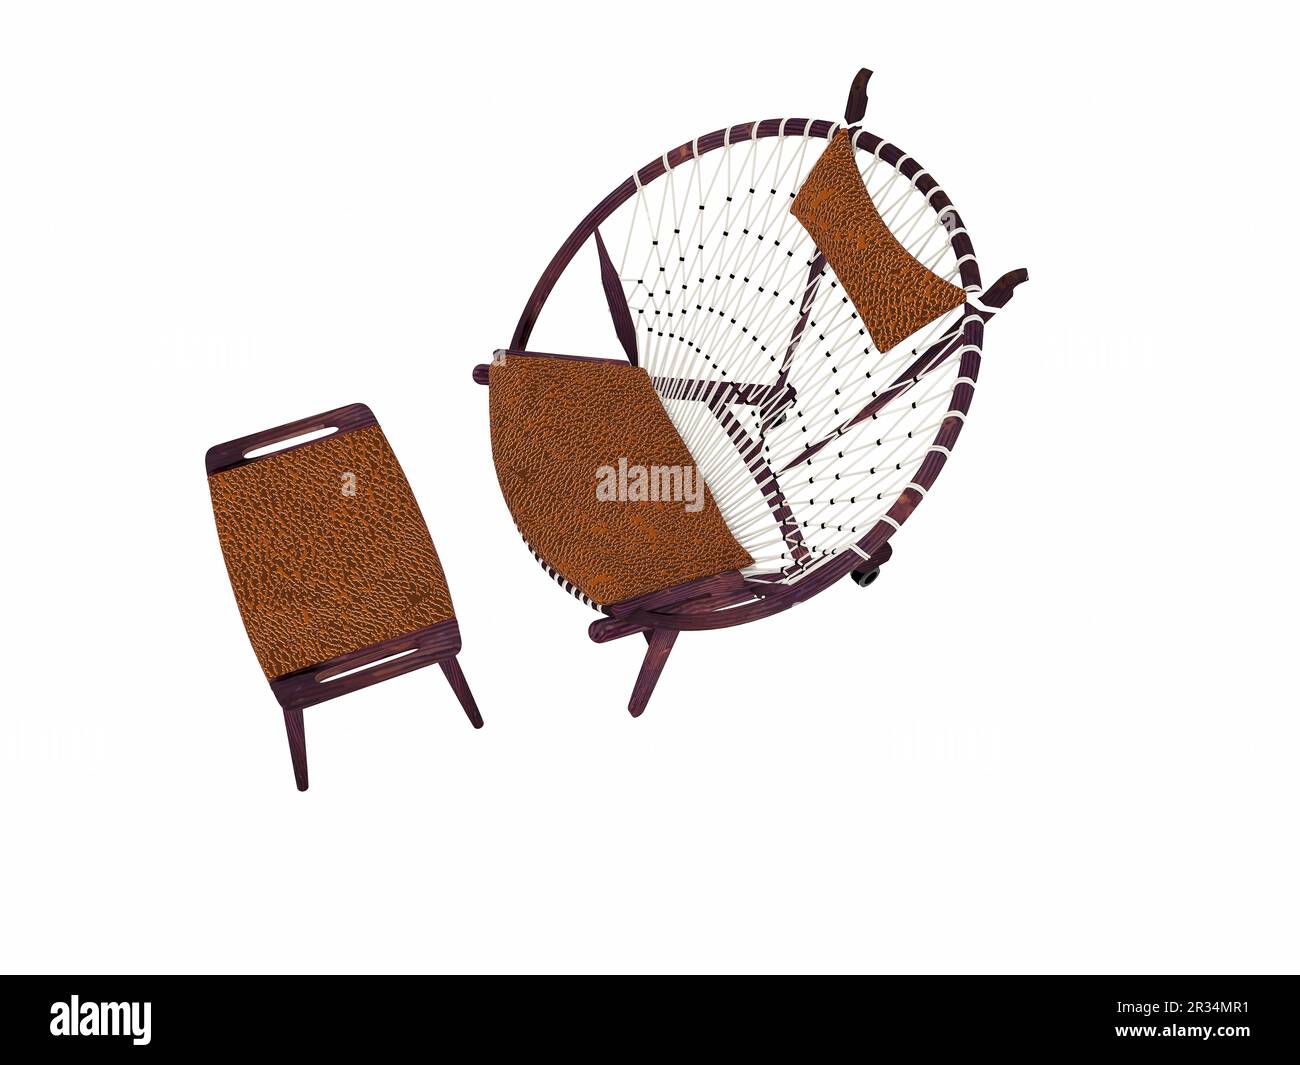 wooden chairs and table Stock Photo